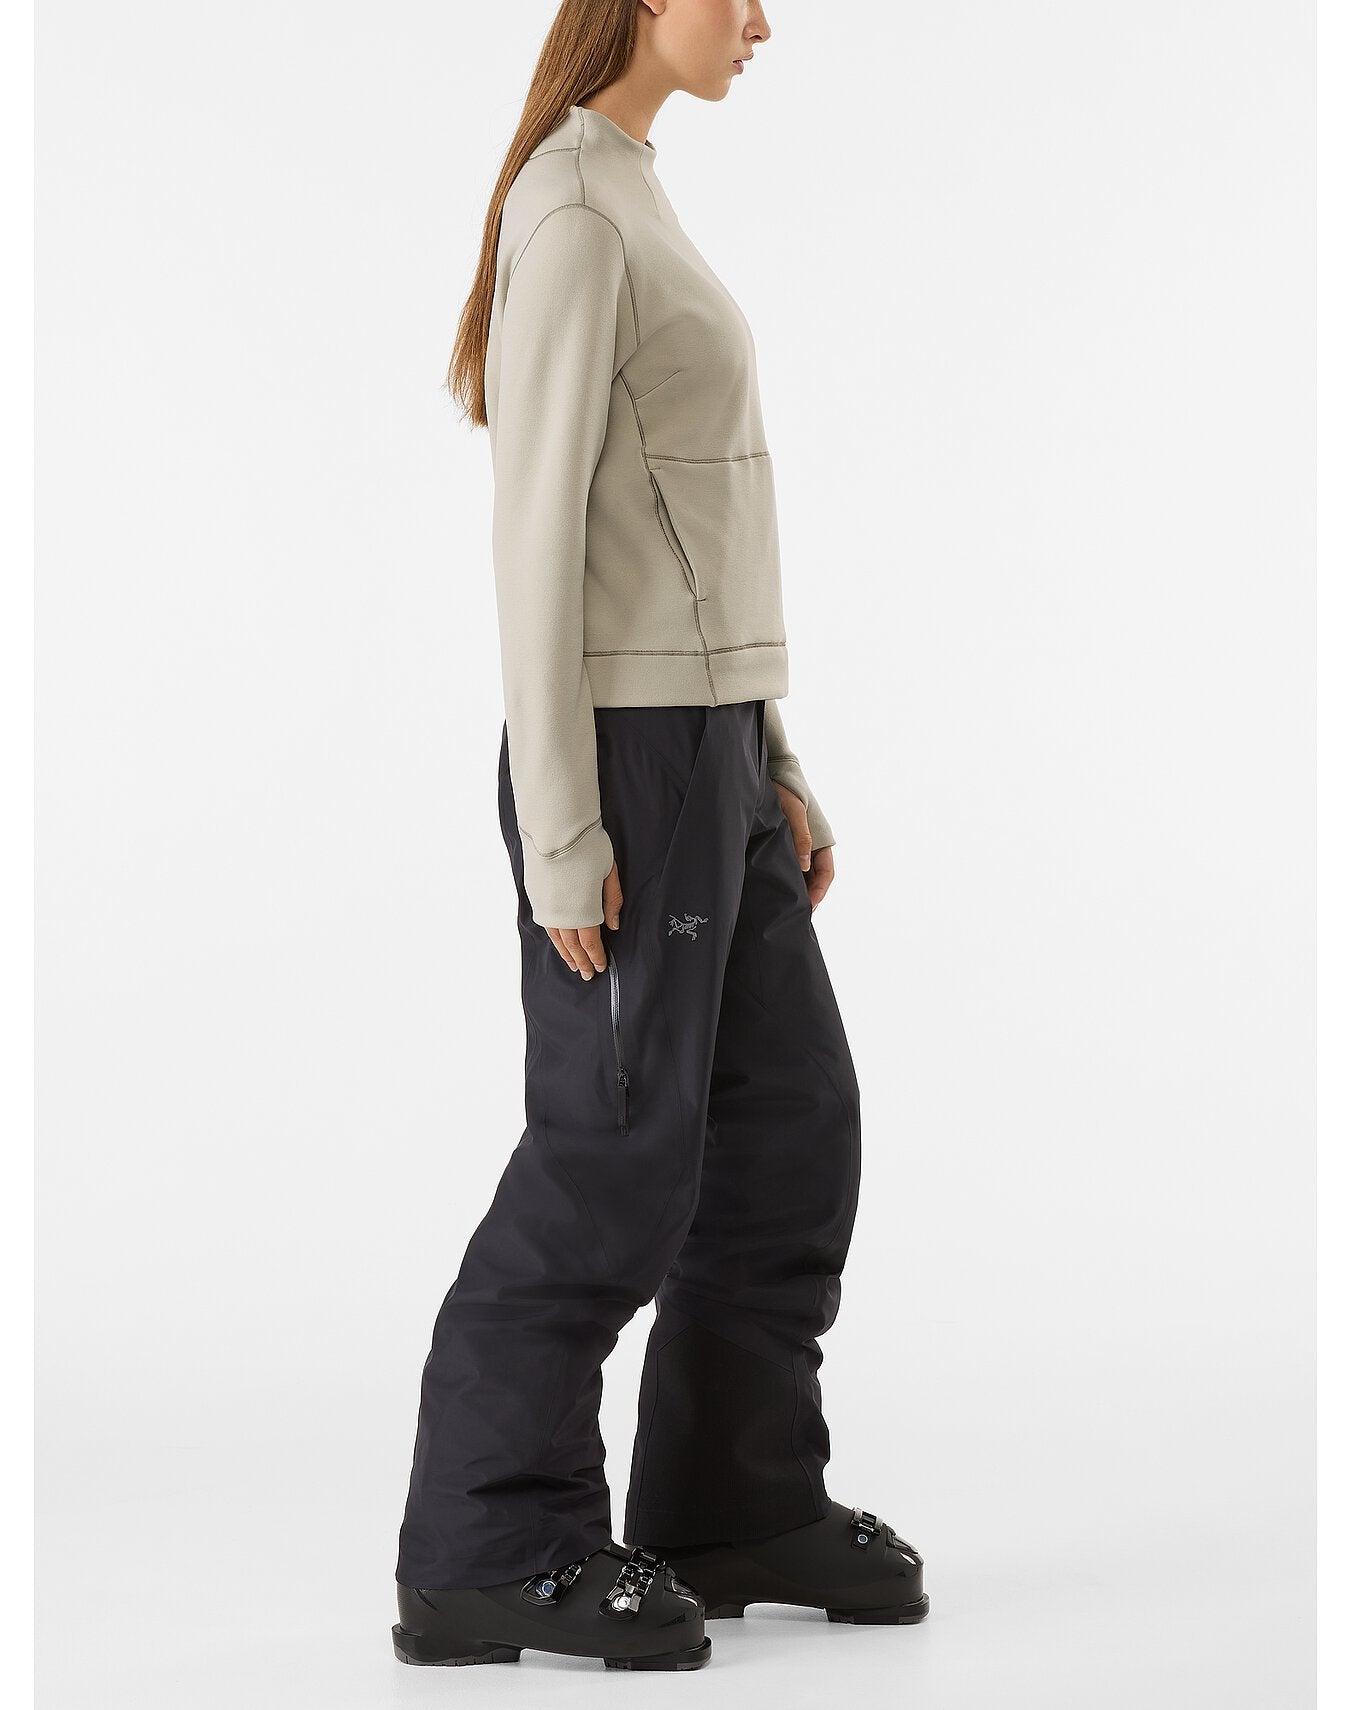 Andessa Pant for Women